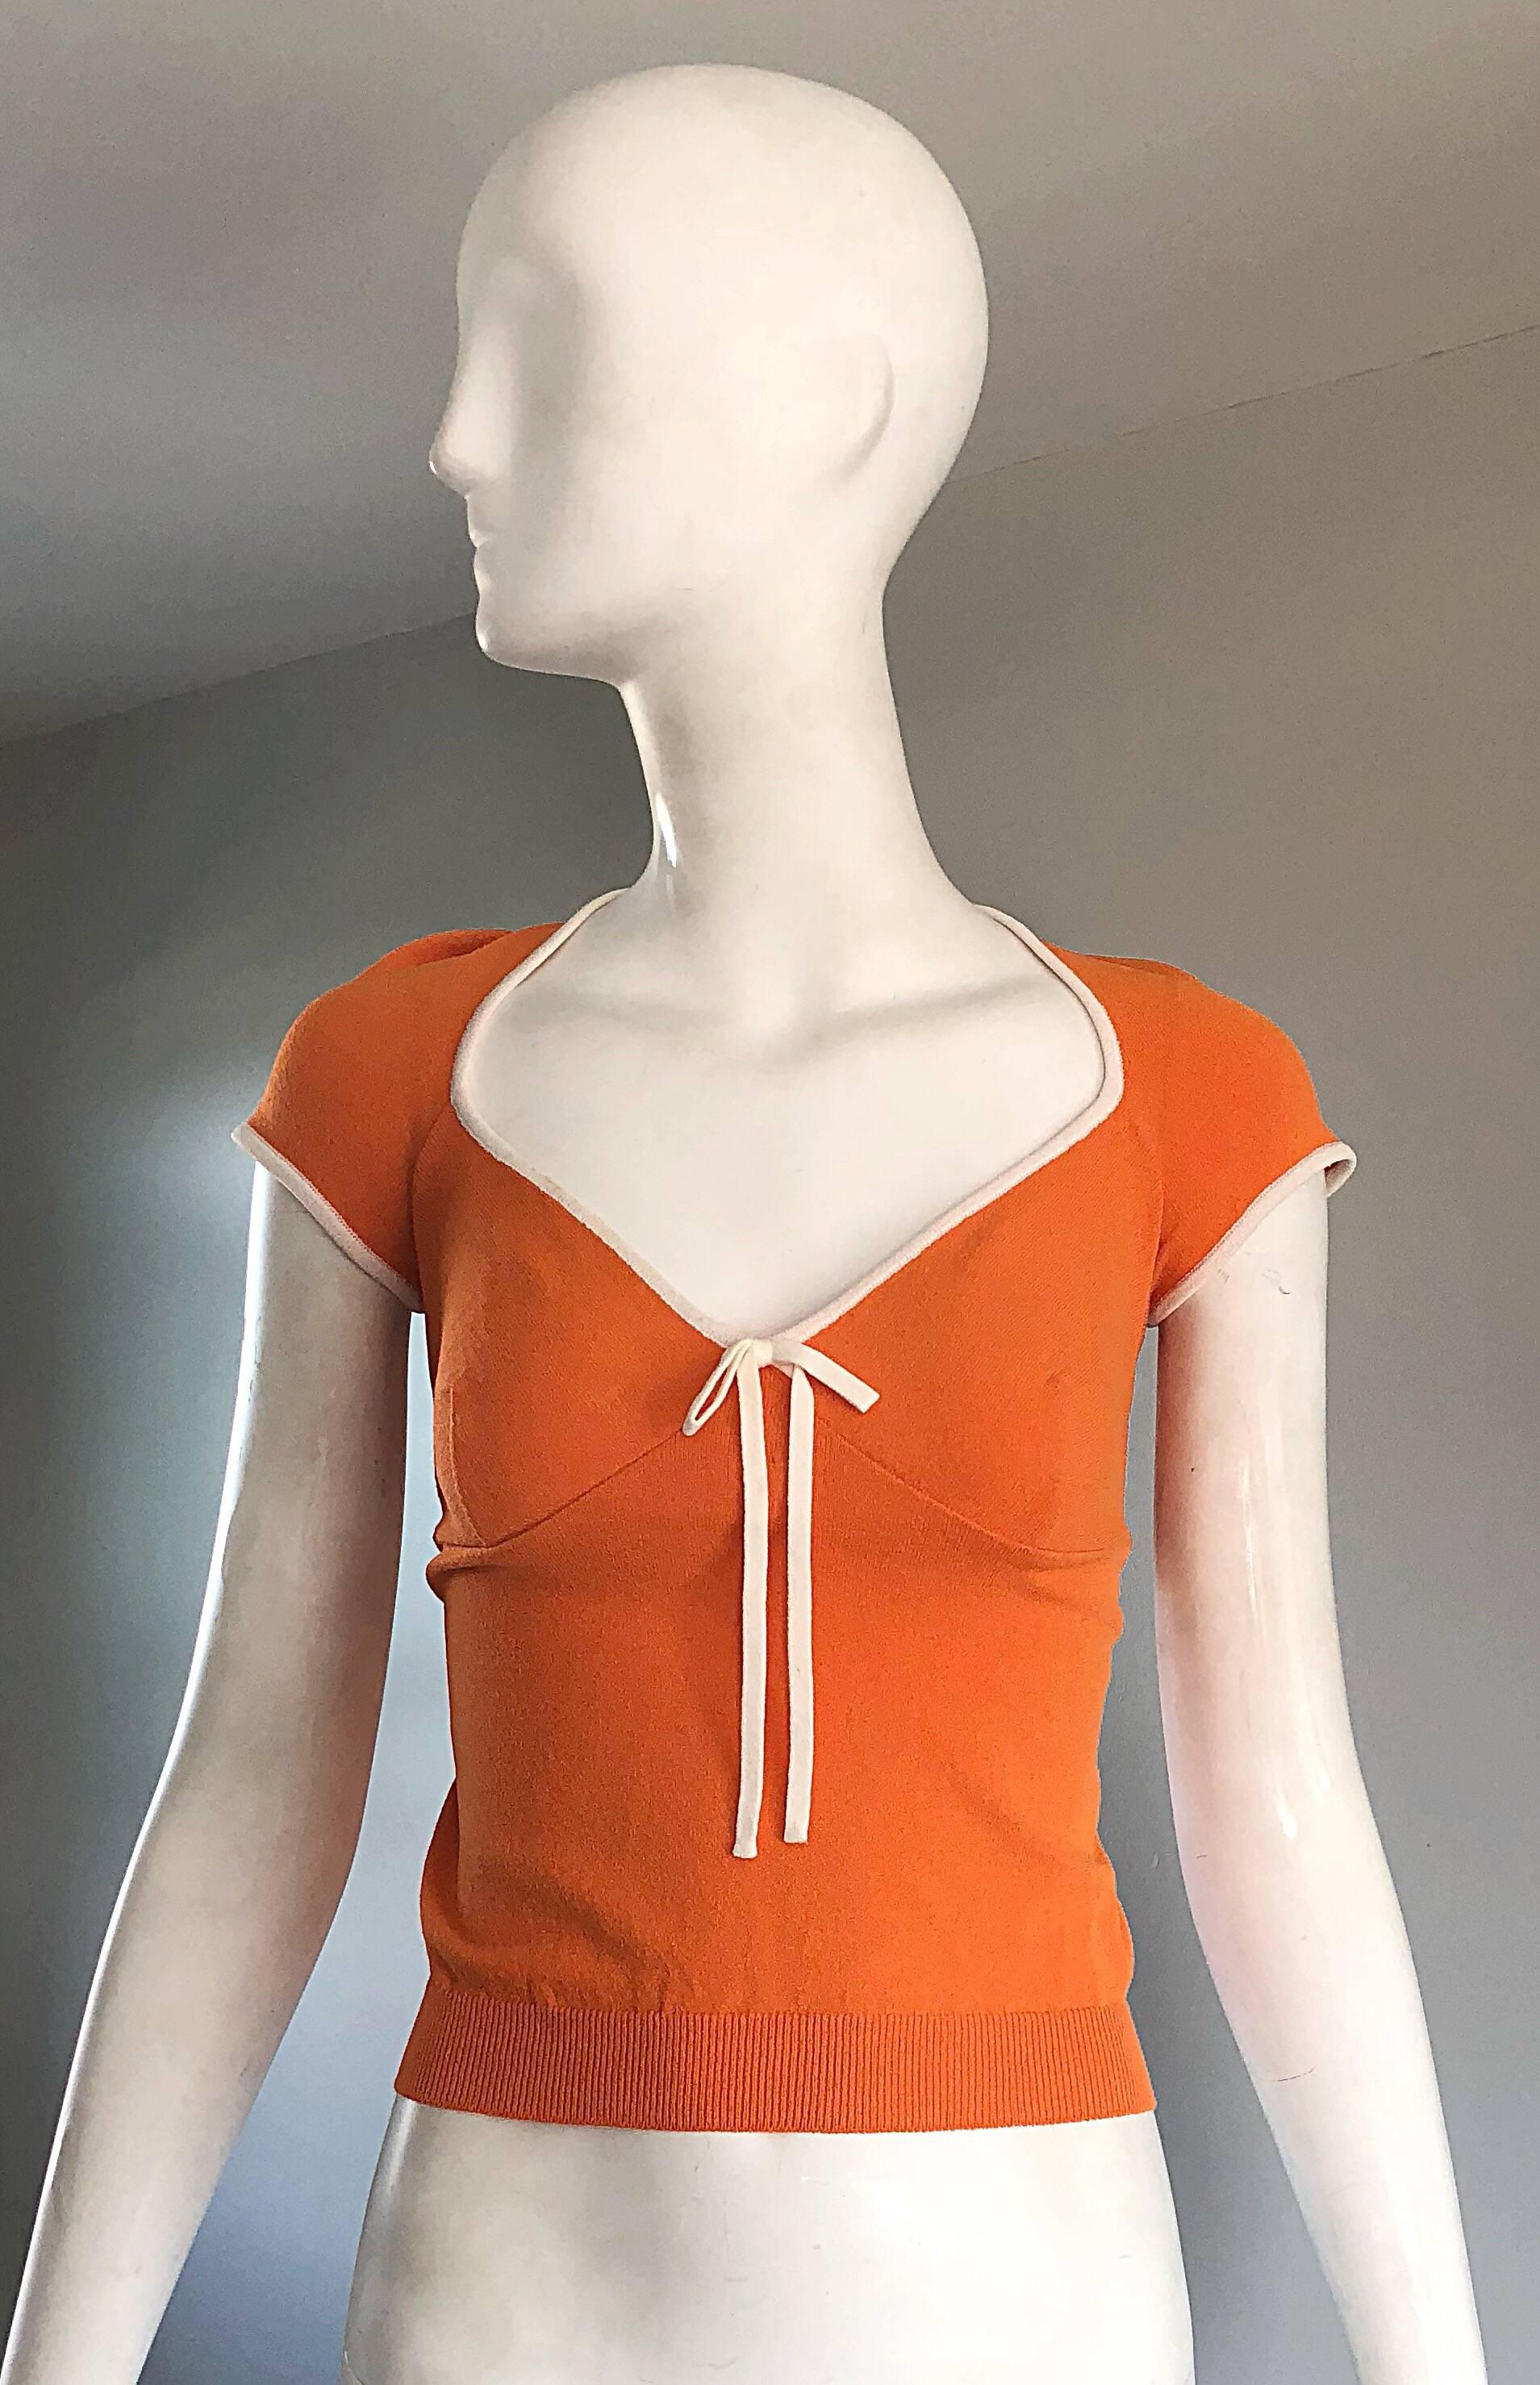 Adorable 1990s MOSCHINO CHEAP AND CHIC orange and white cap sleeve top! Soft crepe rayon stretches to fit. Chic bow at center bust. Vibrant orange color, with white trim along the neck and cap sleeves. Can easily be dressed up or down. Great with